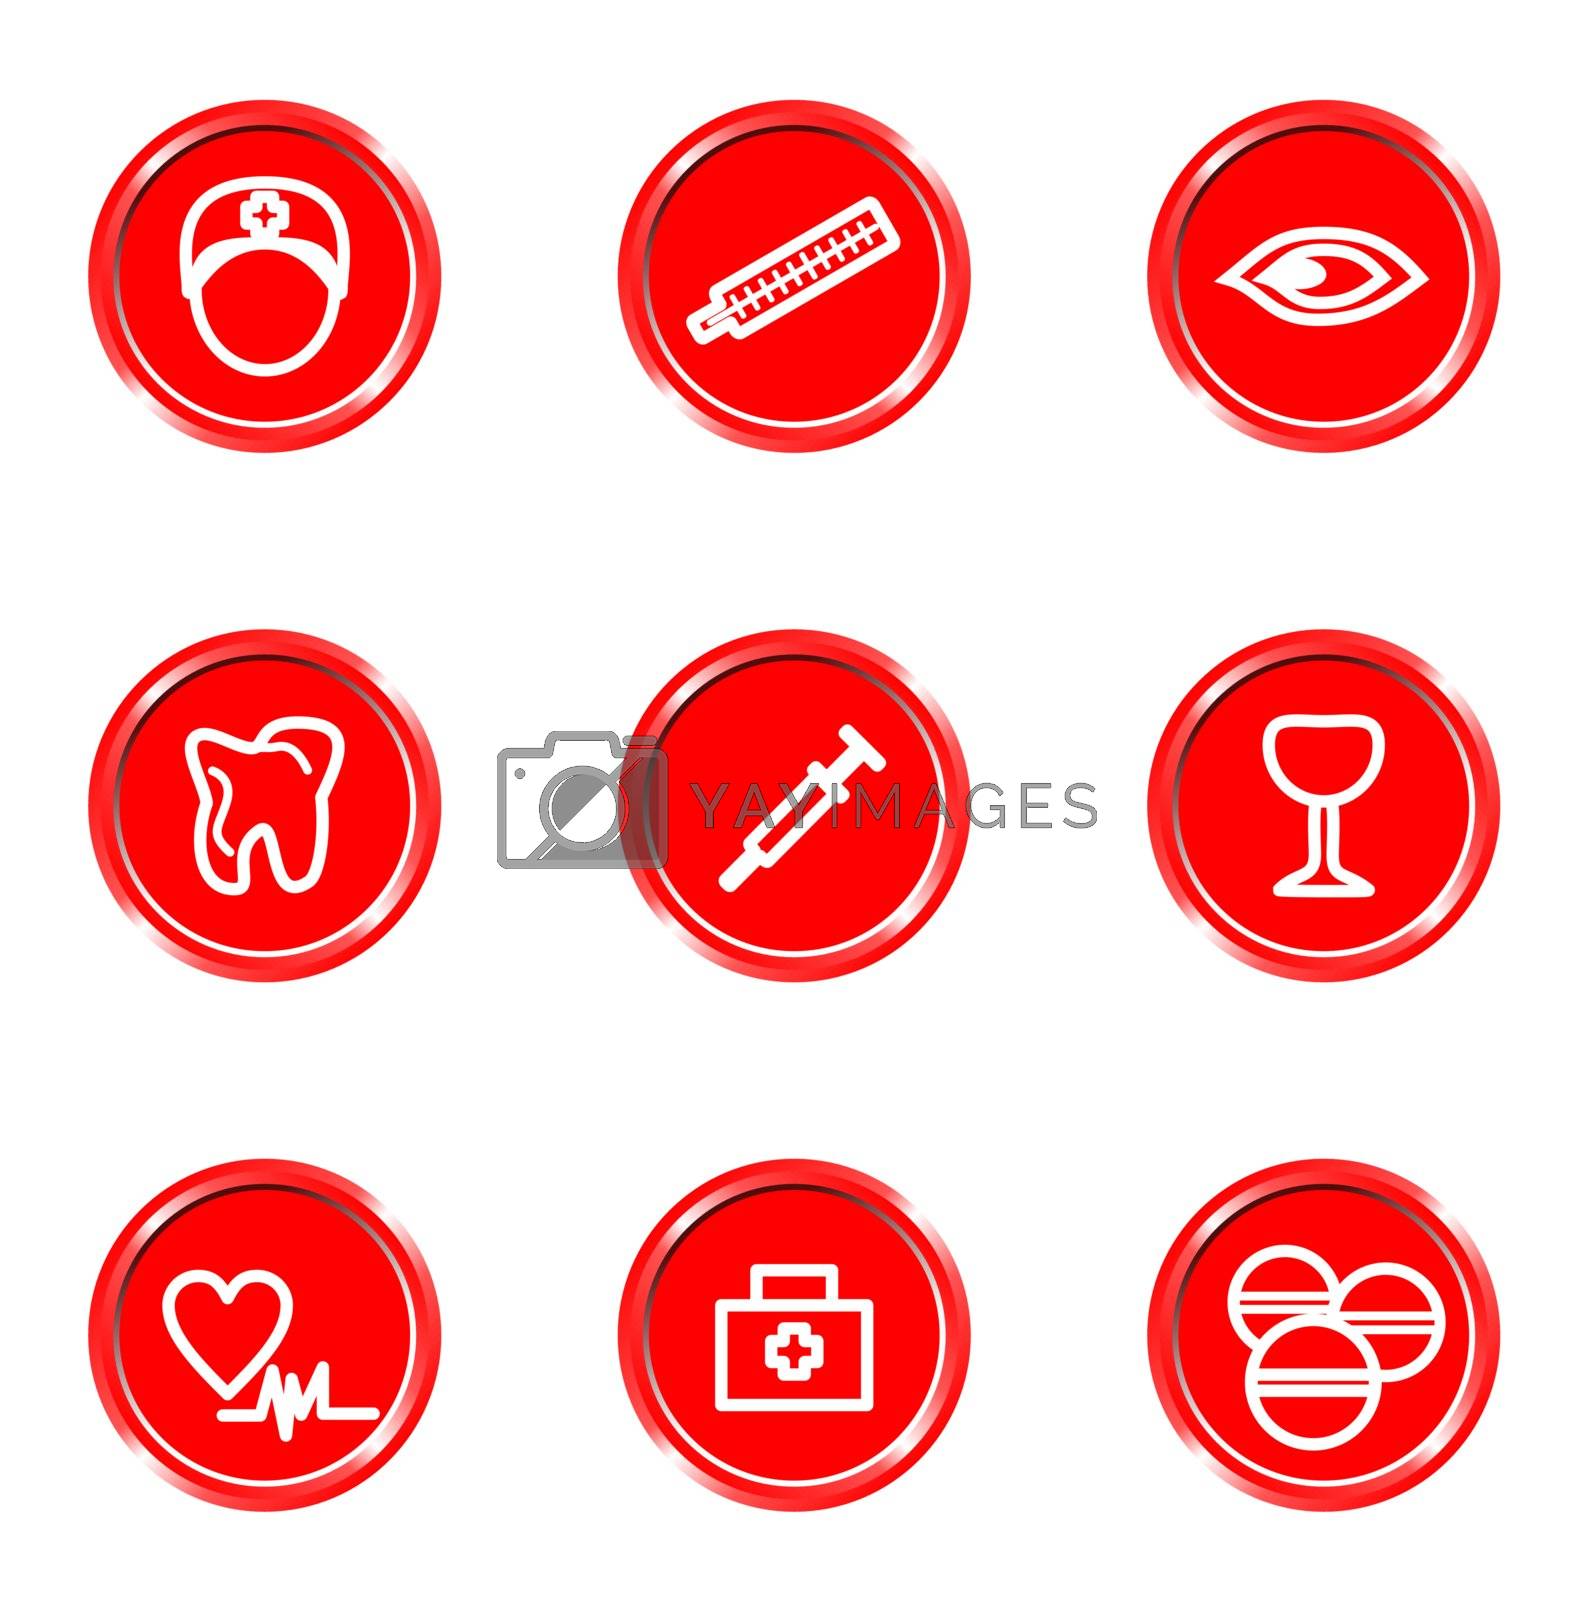 Royalty free image of Glossy icons set by Fyuriy